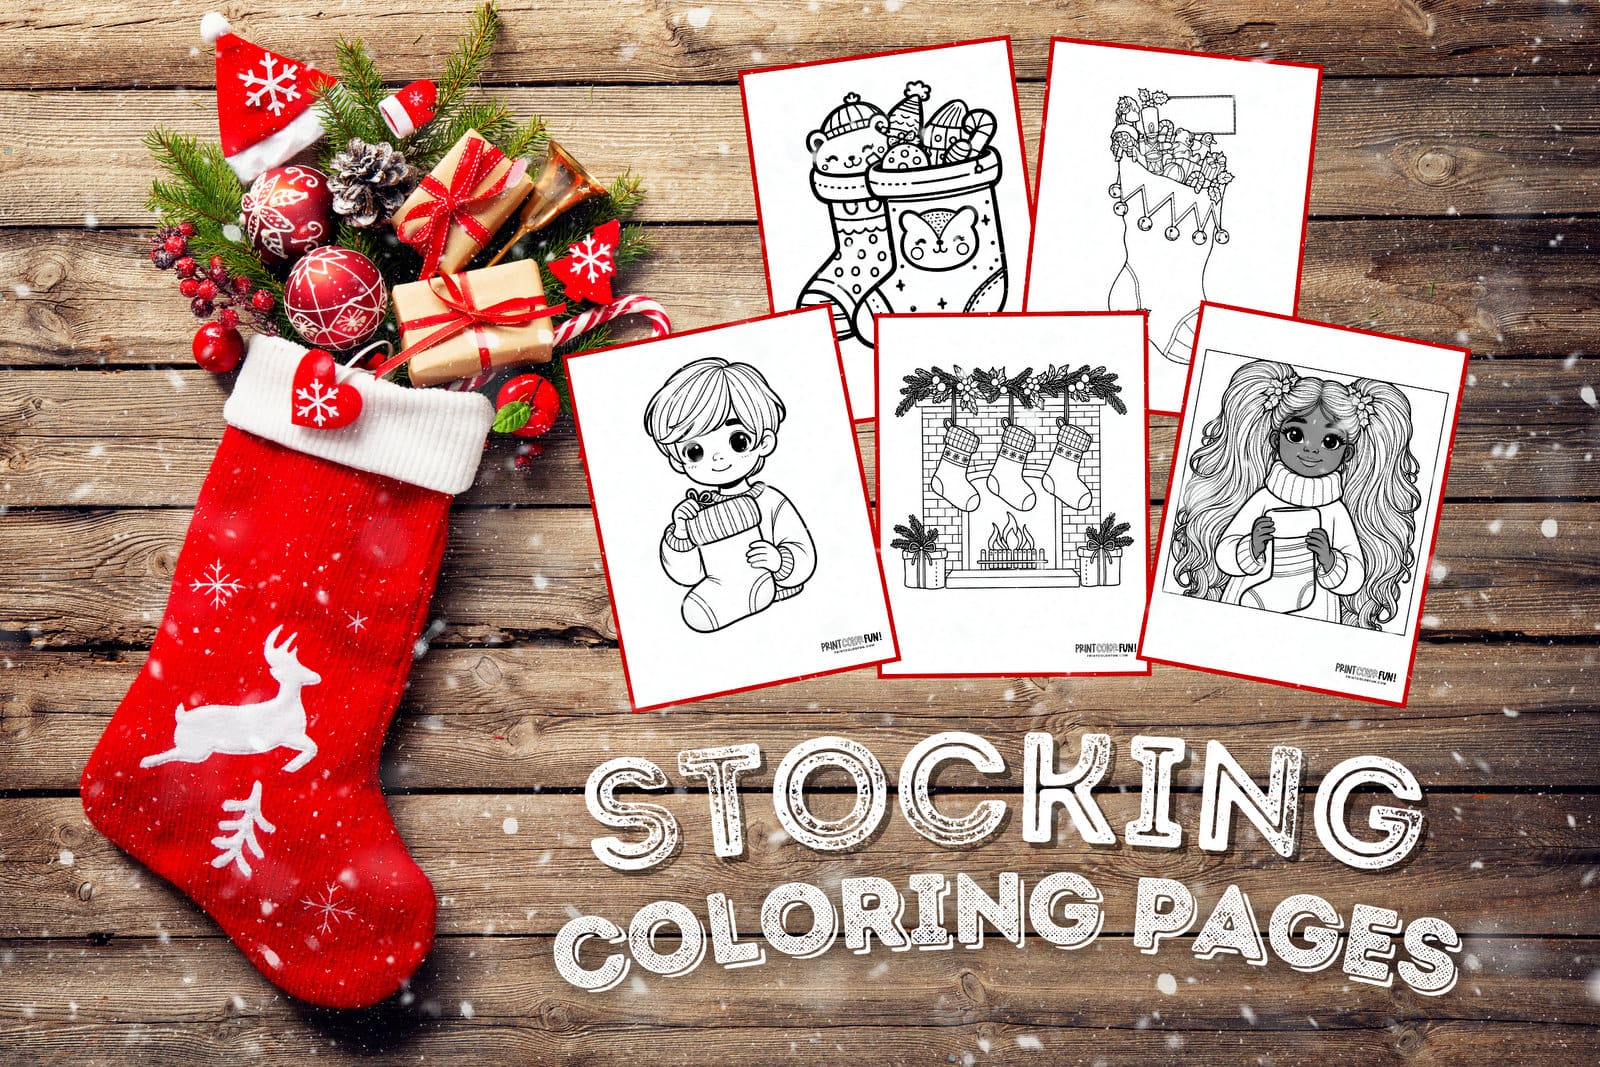 Christmas Stocking Pattern, Free Printable Templates & Coloring Pages